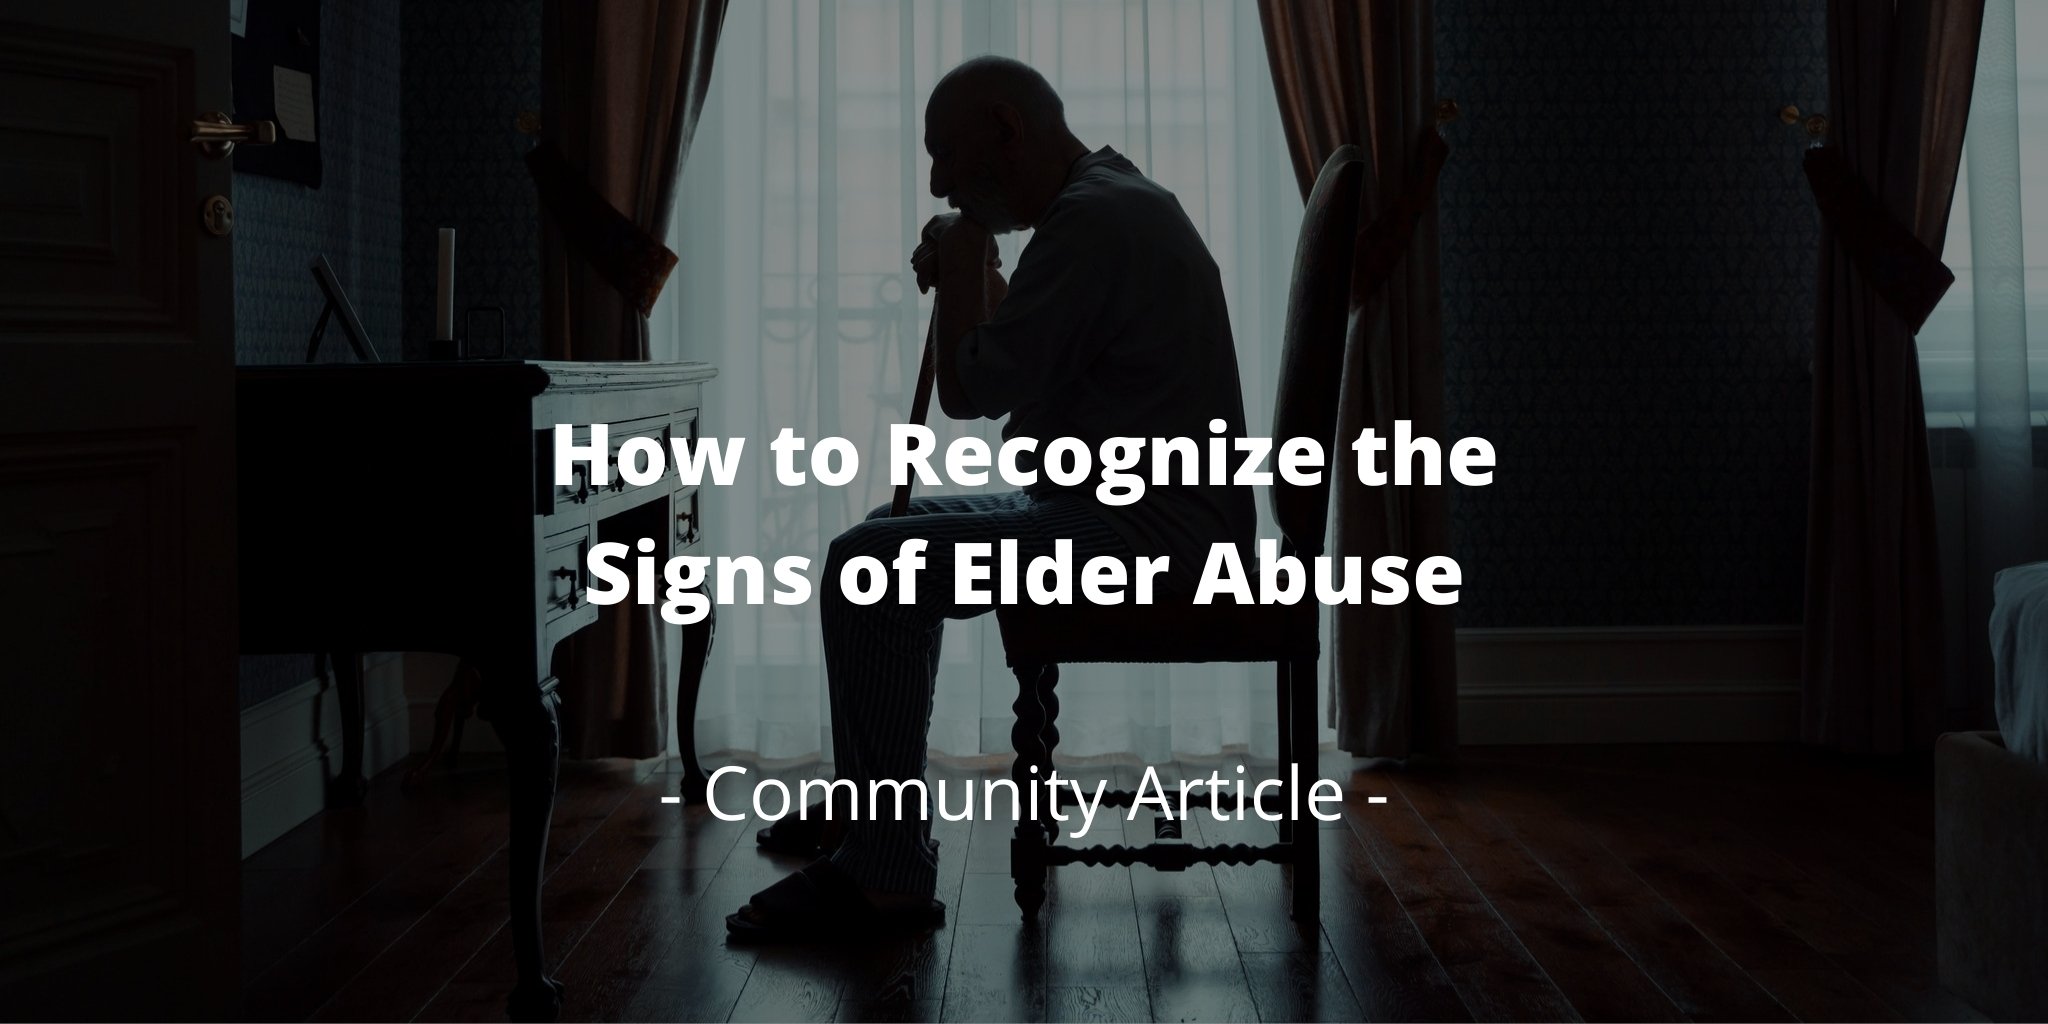 How to Recognize the Signs of Elder Abuse